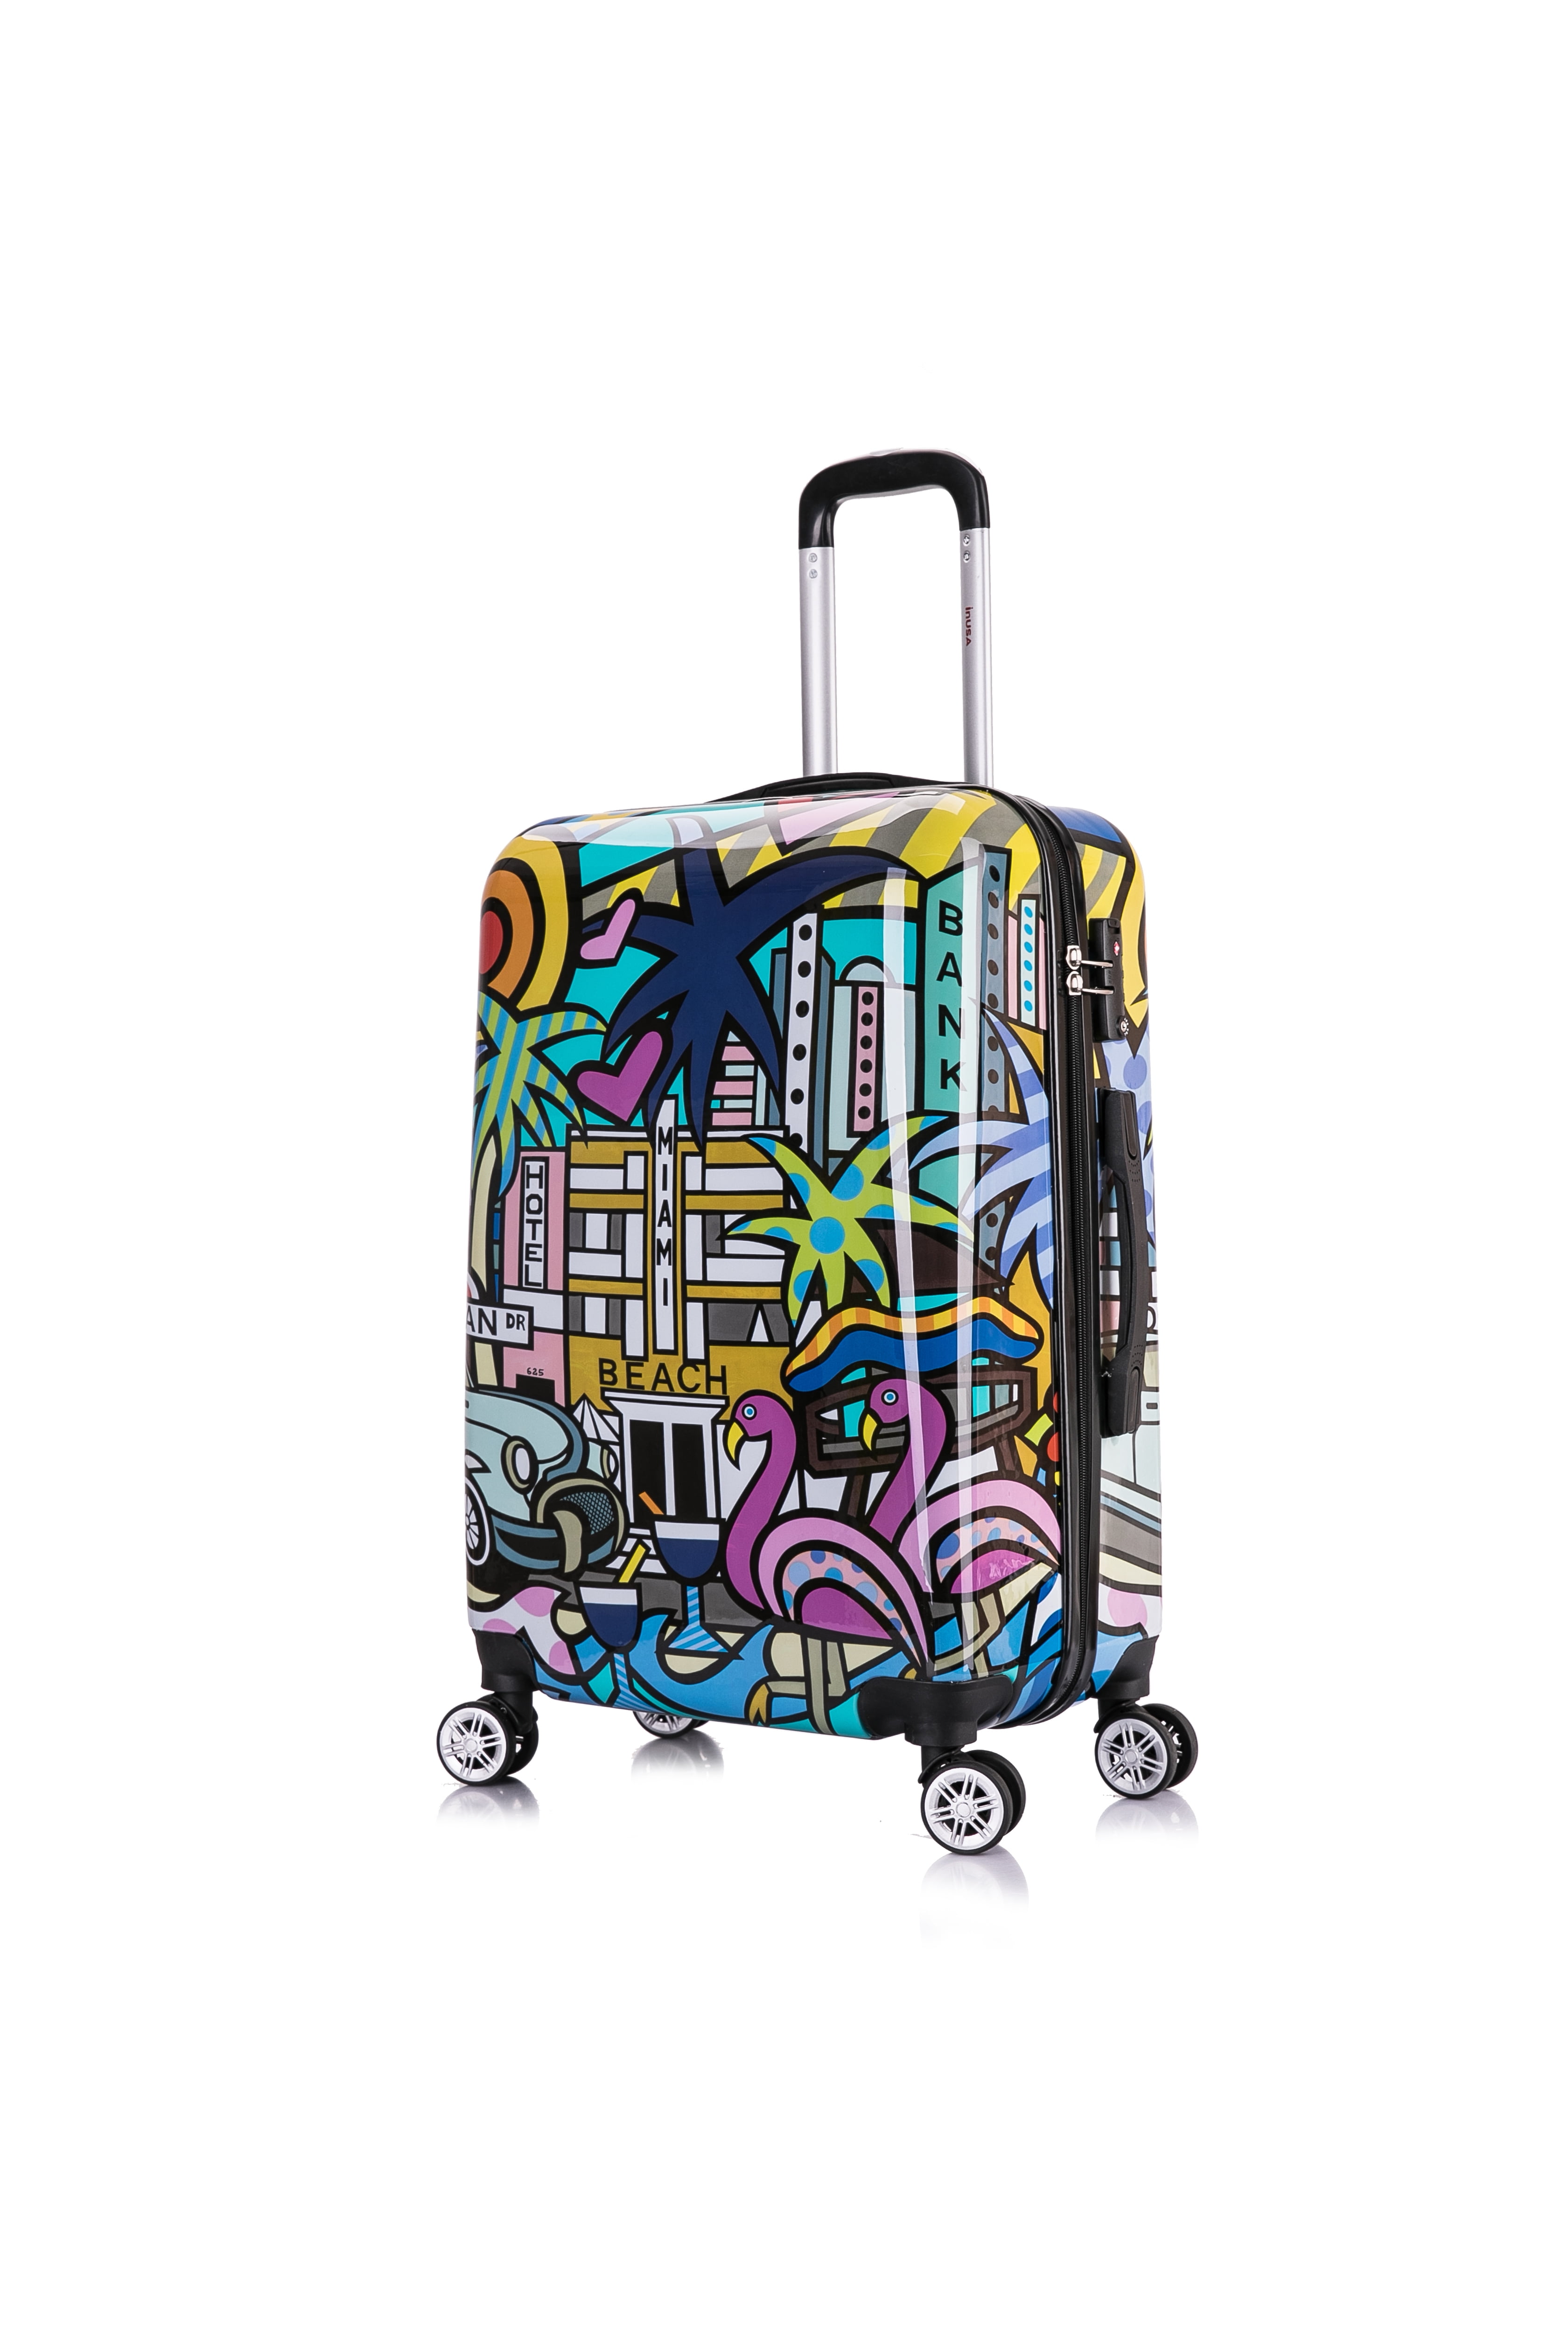 InUSA 24 Inch Medium Hardside Spinner Luggage with Ergonomic Handles Butterfly Printed Travel Suitcase with Four Spinner Wheels and Studs Black Butterfly 